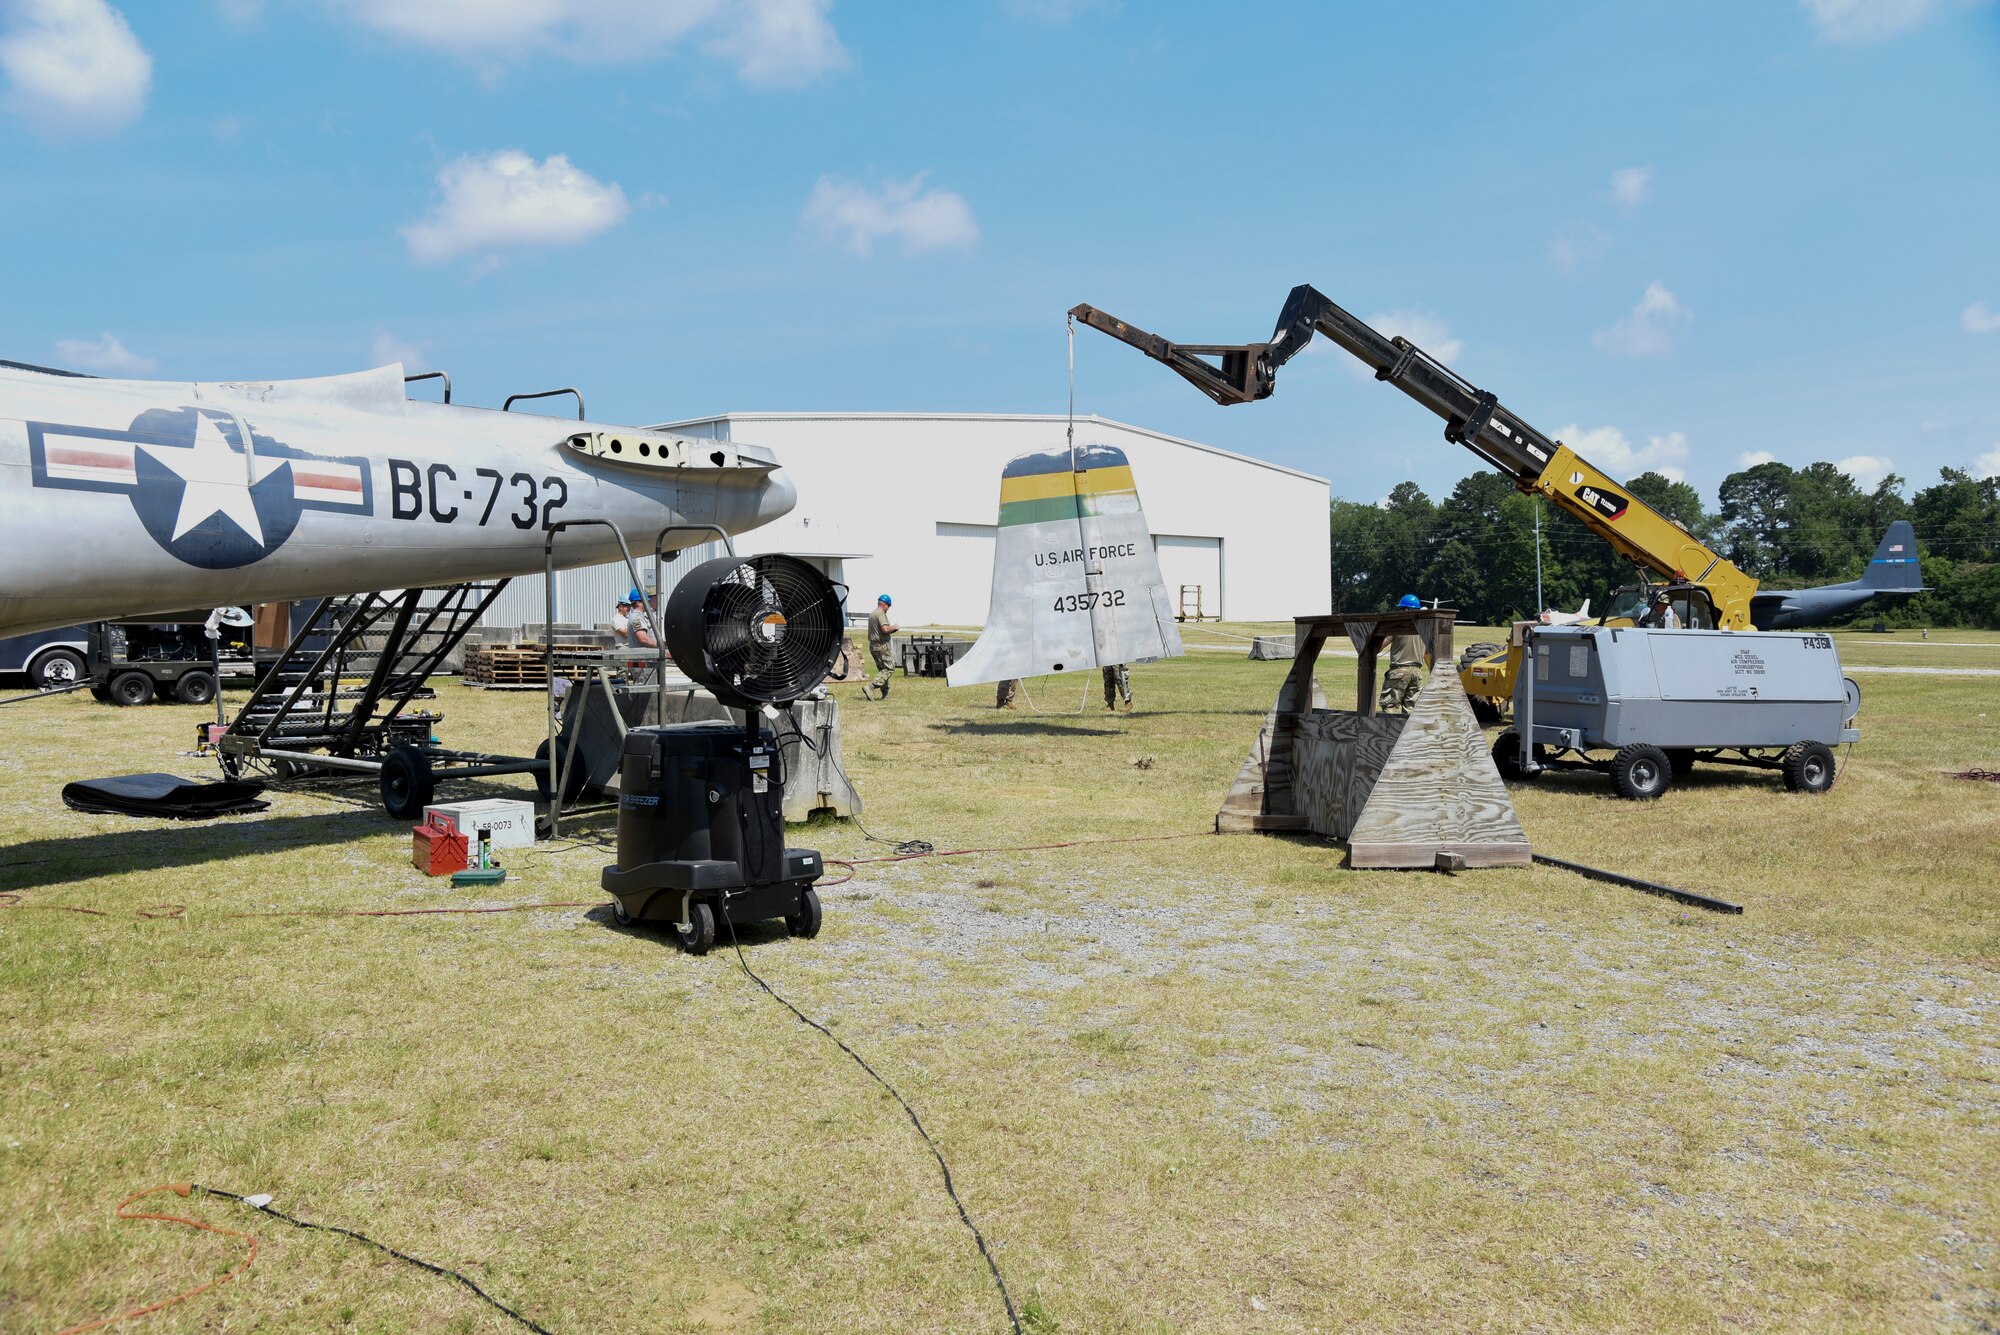 Members of the 117th Maintenance Group disassemble an A-26 Invader at the Museum of Aviation, Warner Robins, Ga., June 22, 2020. This aircraft will be relocated to Sumpter Smith Joint National Guard Base, Birmingham, Ala. (U.S. Air National Guard photo by: Tech. Sgt. Jim Bentley)